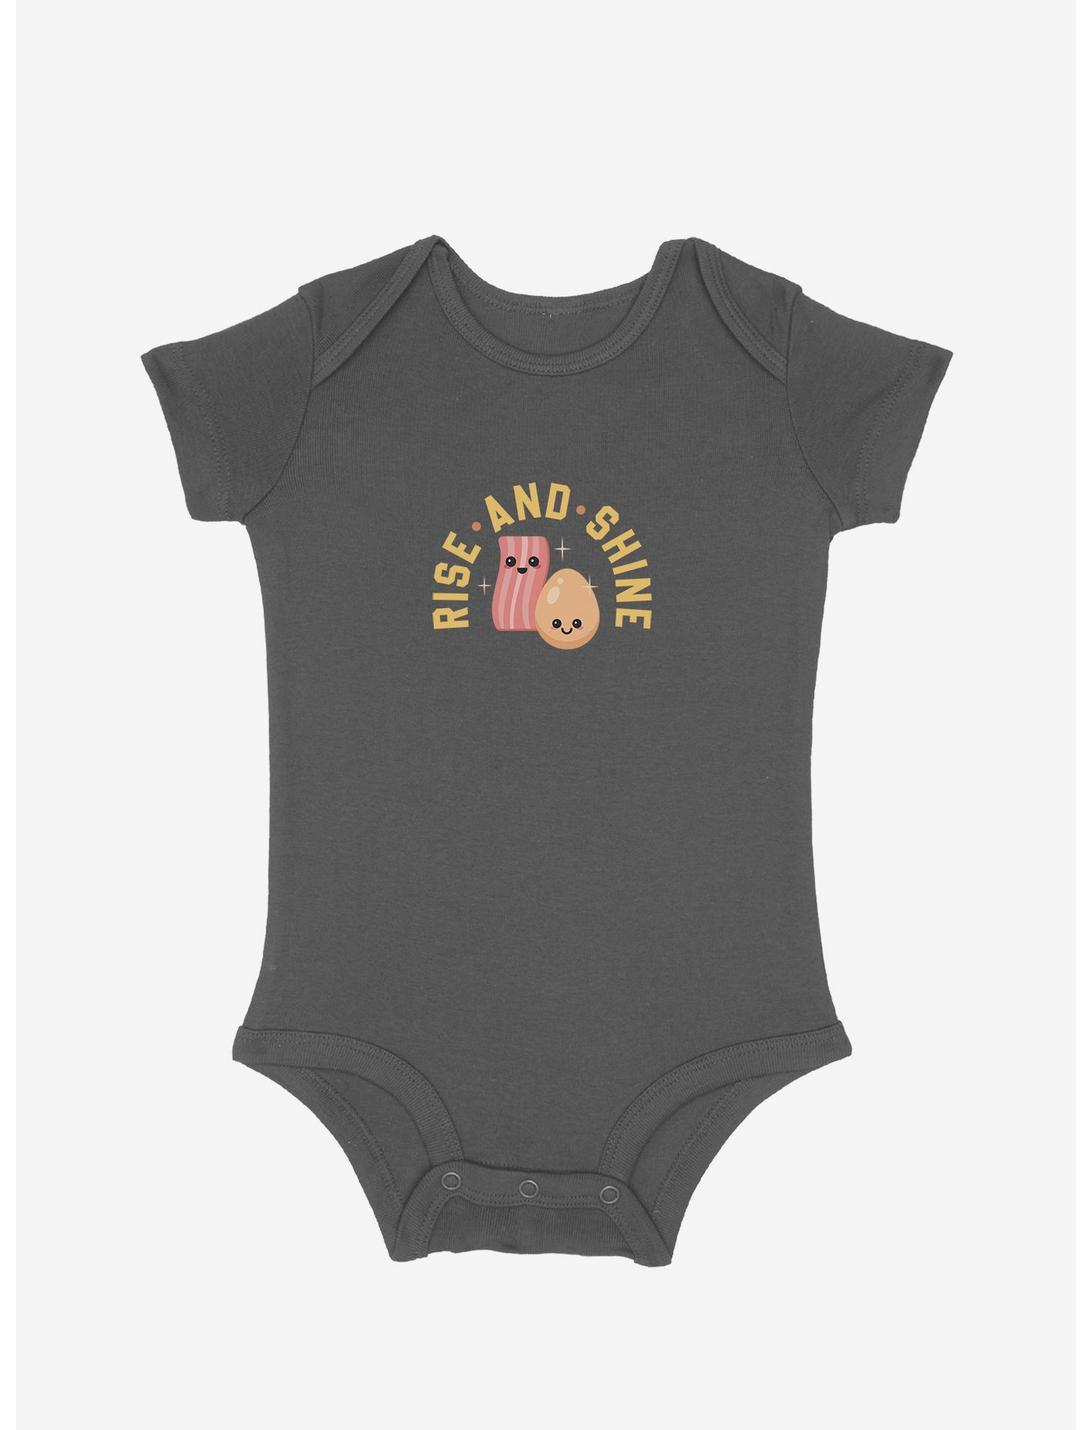 Mommy & Me Rise And Shine Infant Bodysuit, GRAPHITE HEATHER, hi-res